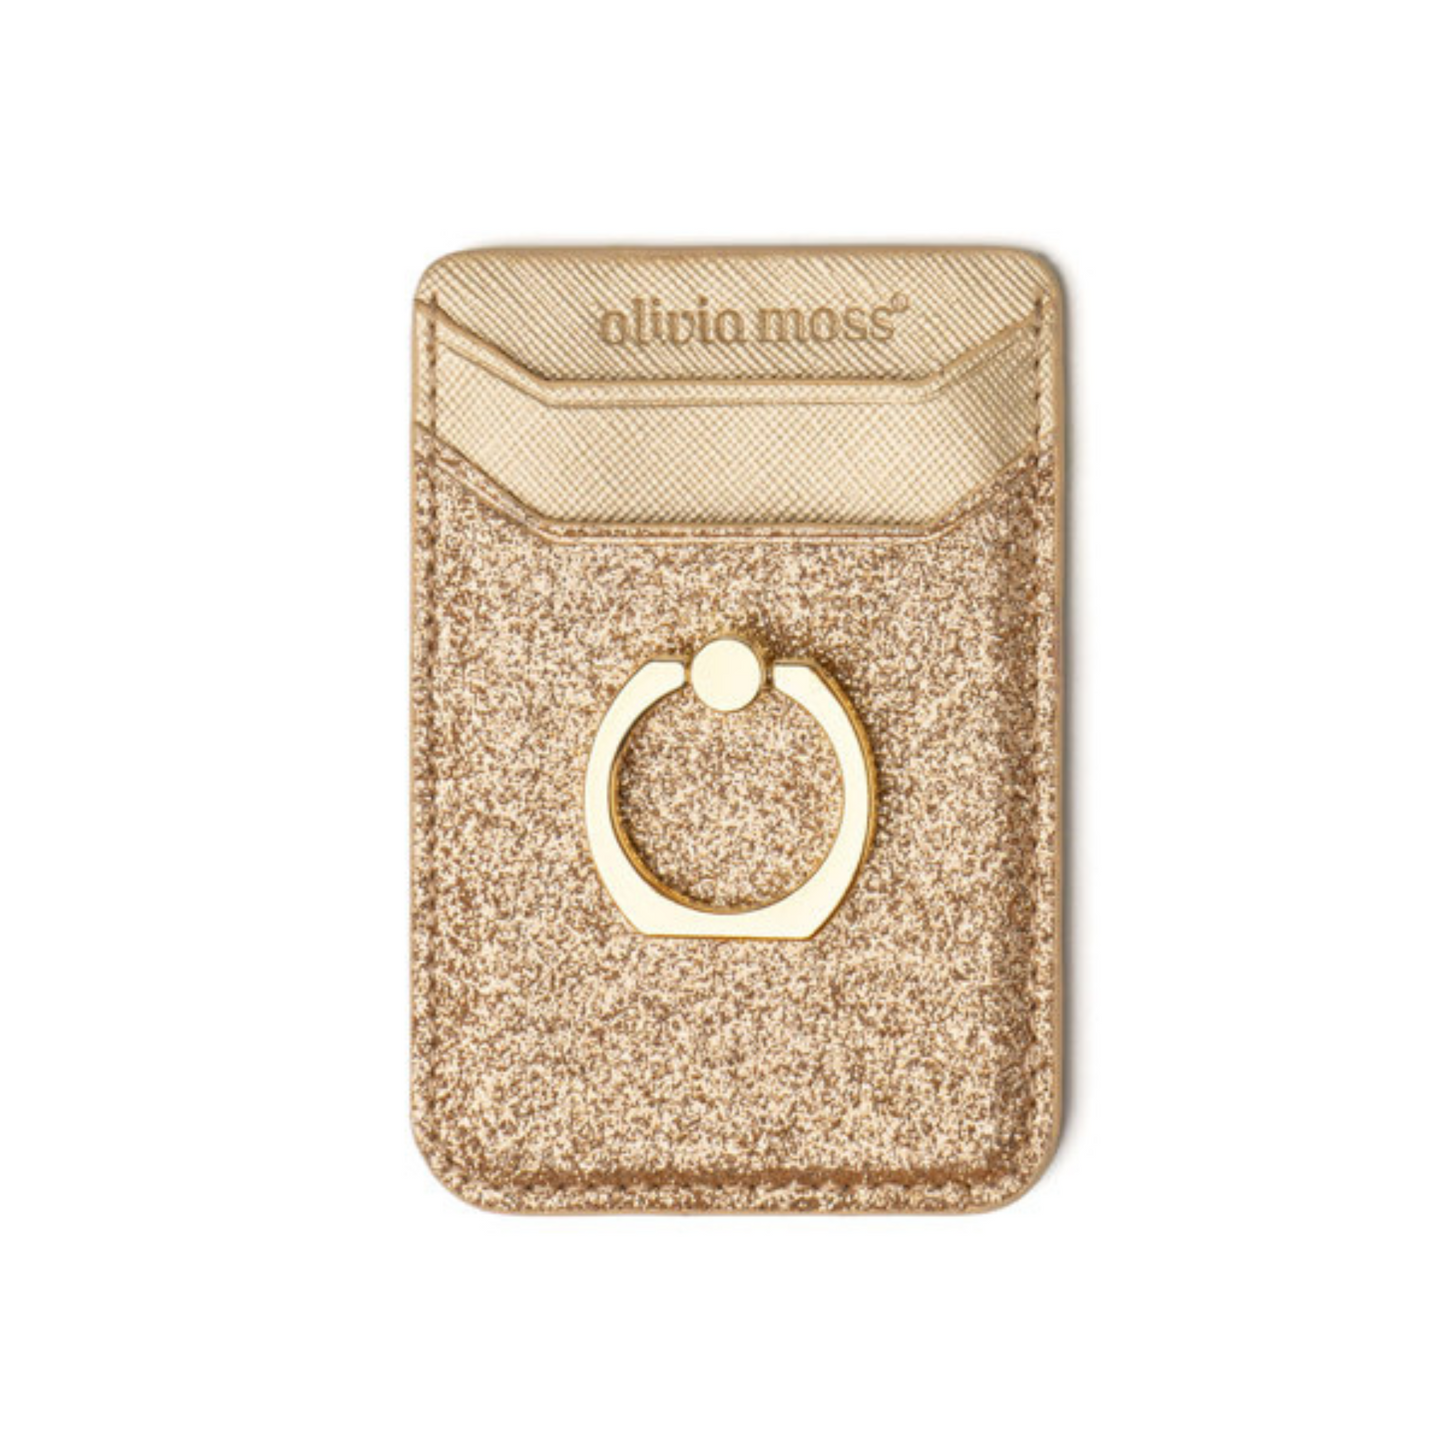 Gold glitter card cling from Olivia Moss